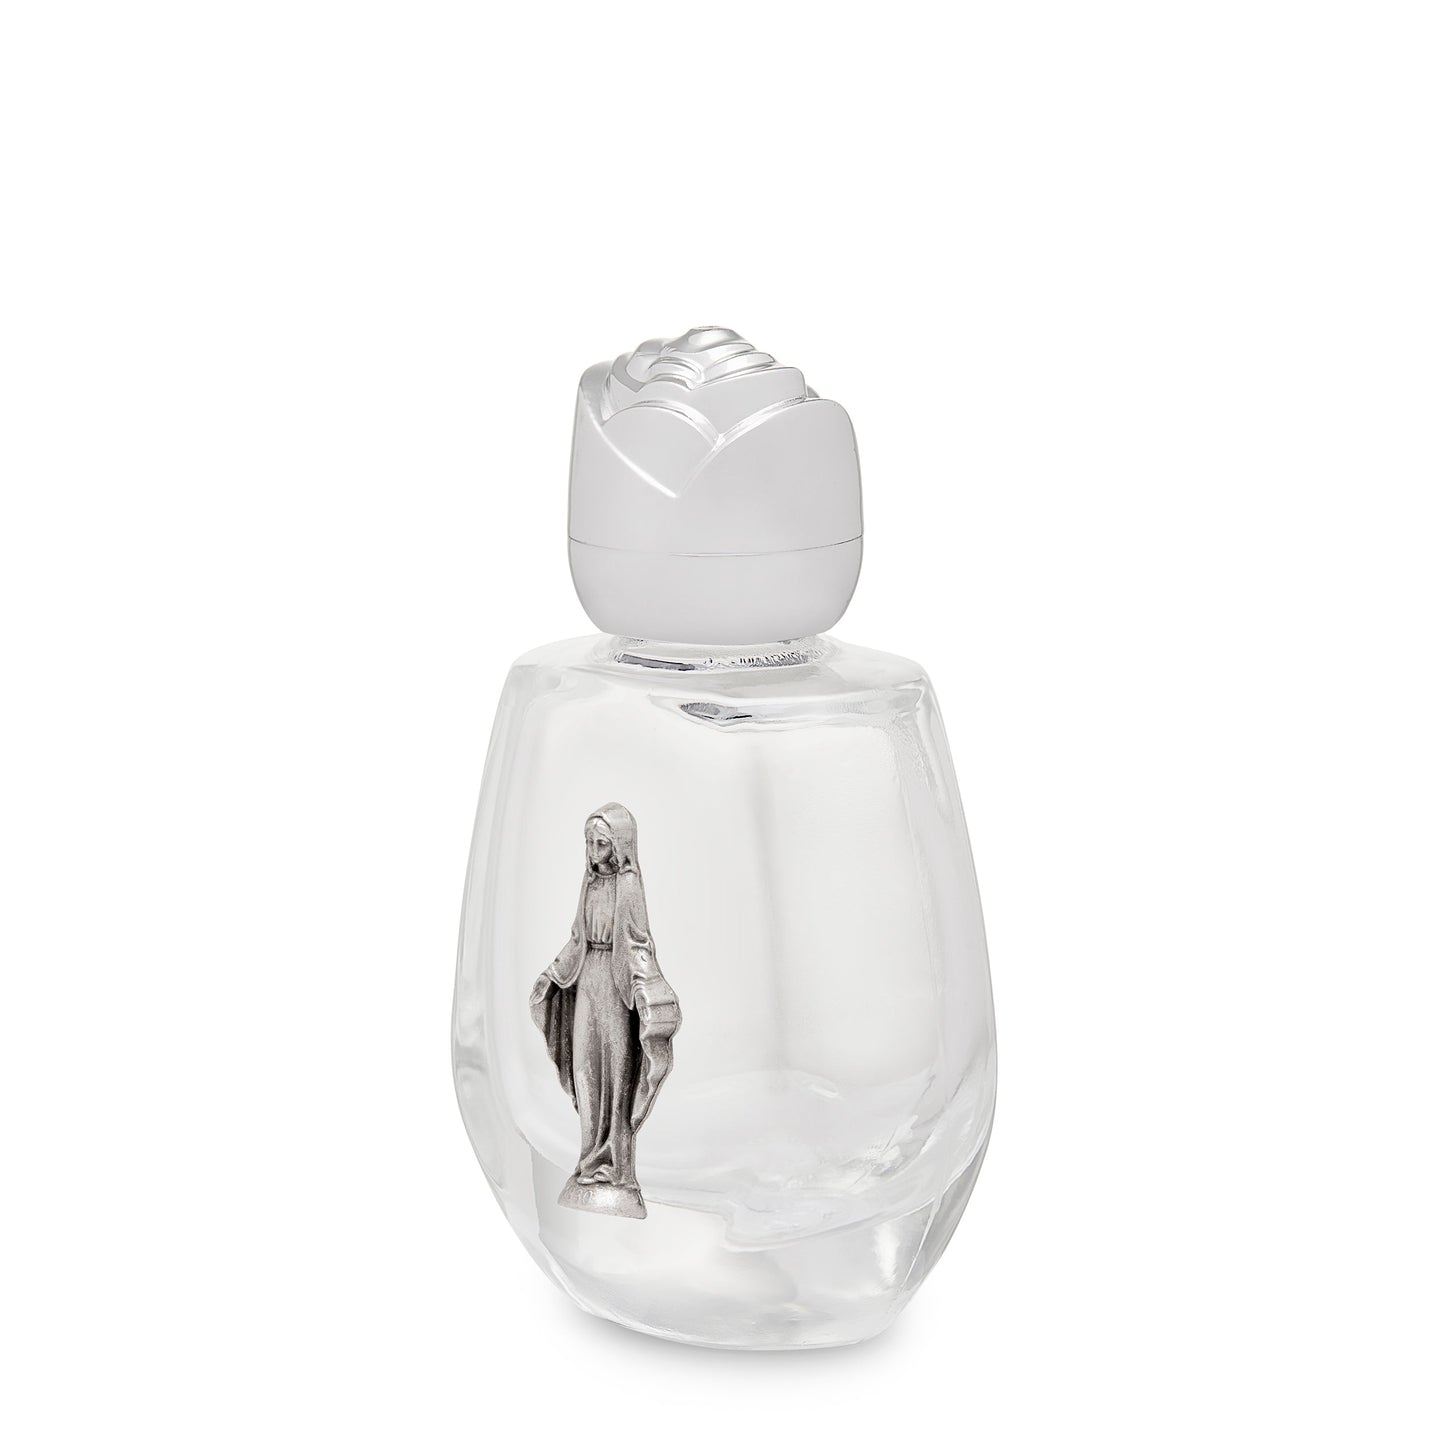 MONDO CATTOLICO Bottle of 10 ml. representing Our Lady of the Miraculous Medal